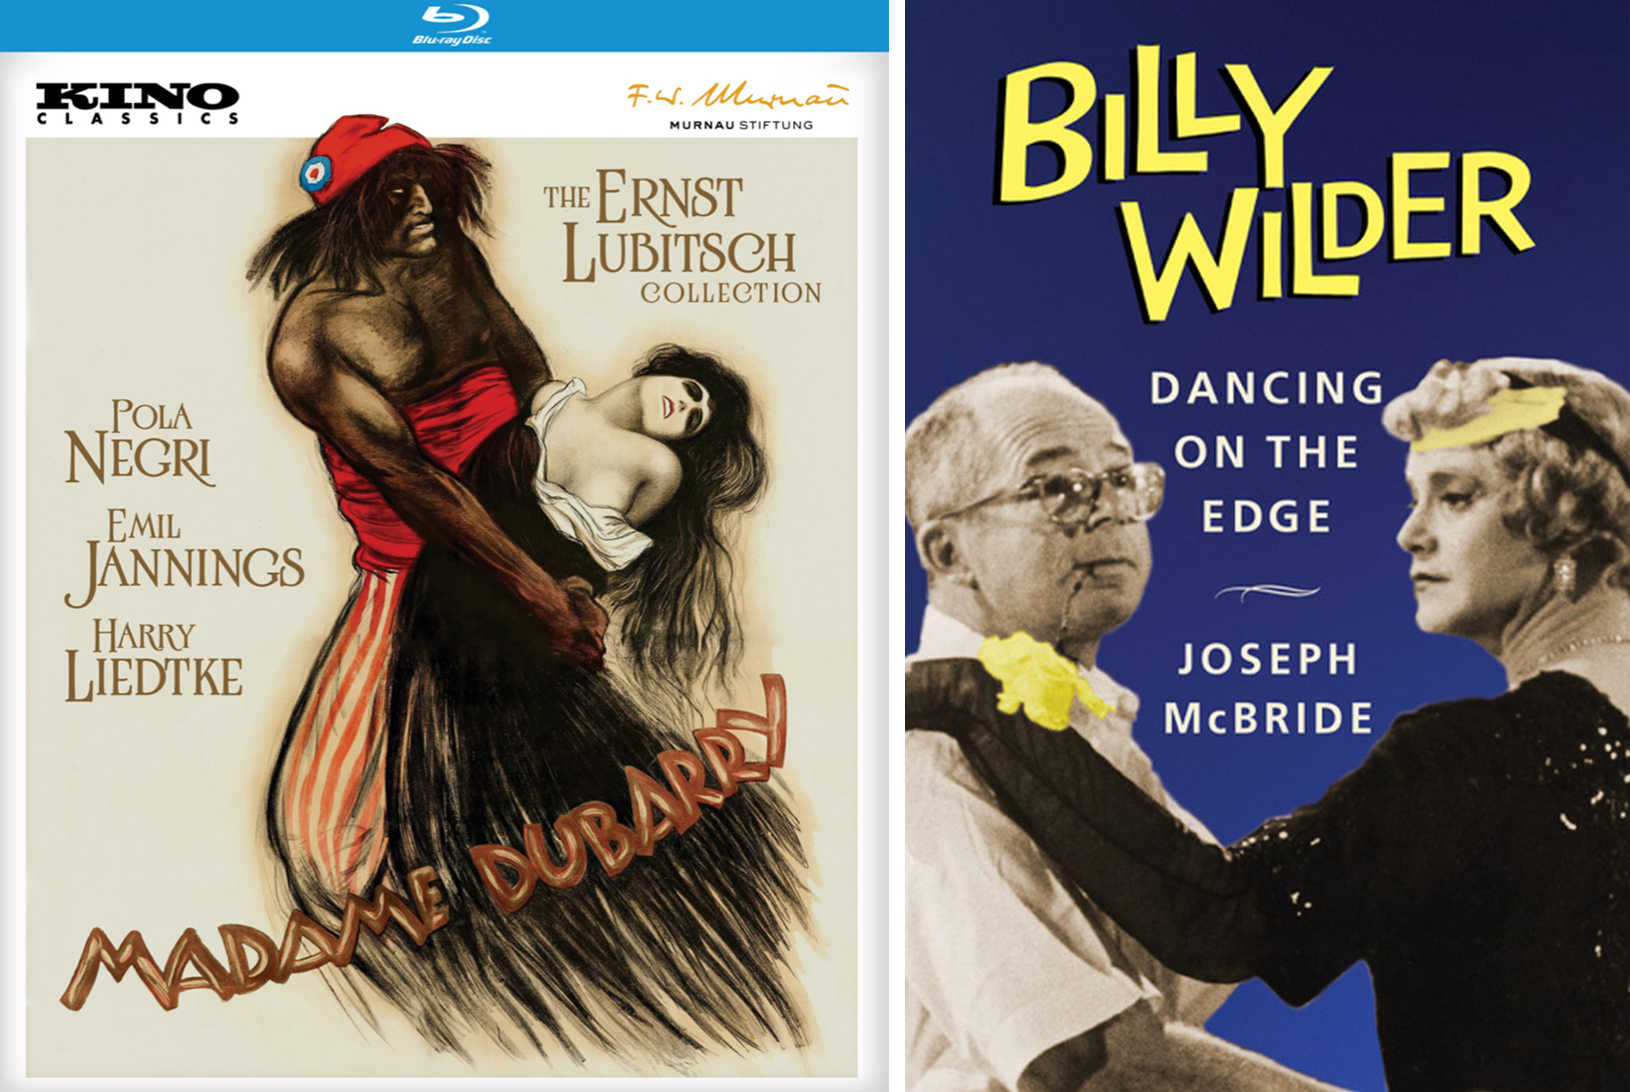 Madame Dubarry Bluray cover (left) and Billy Wilder: Dancing on the Edge book cover (right)